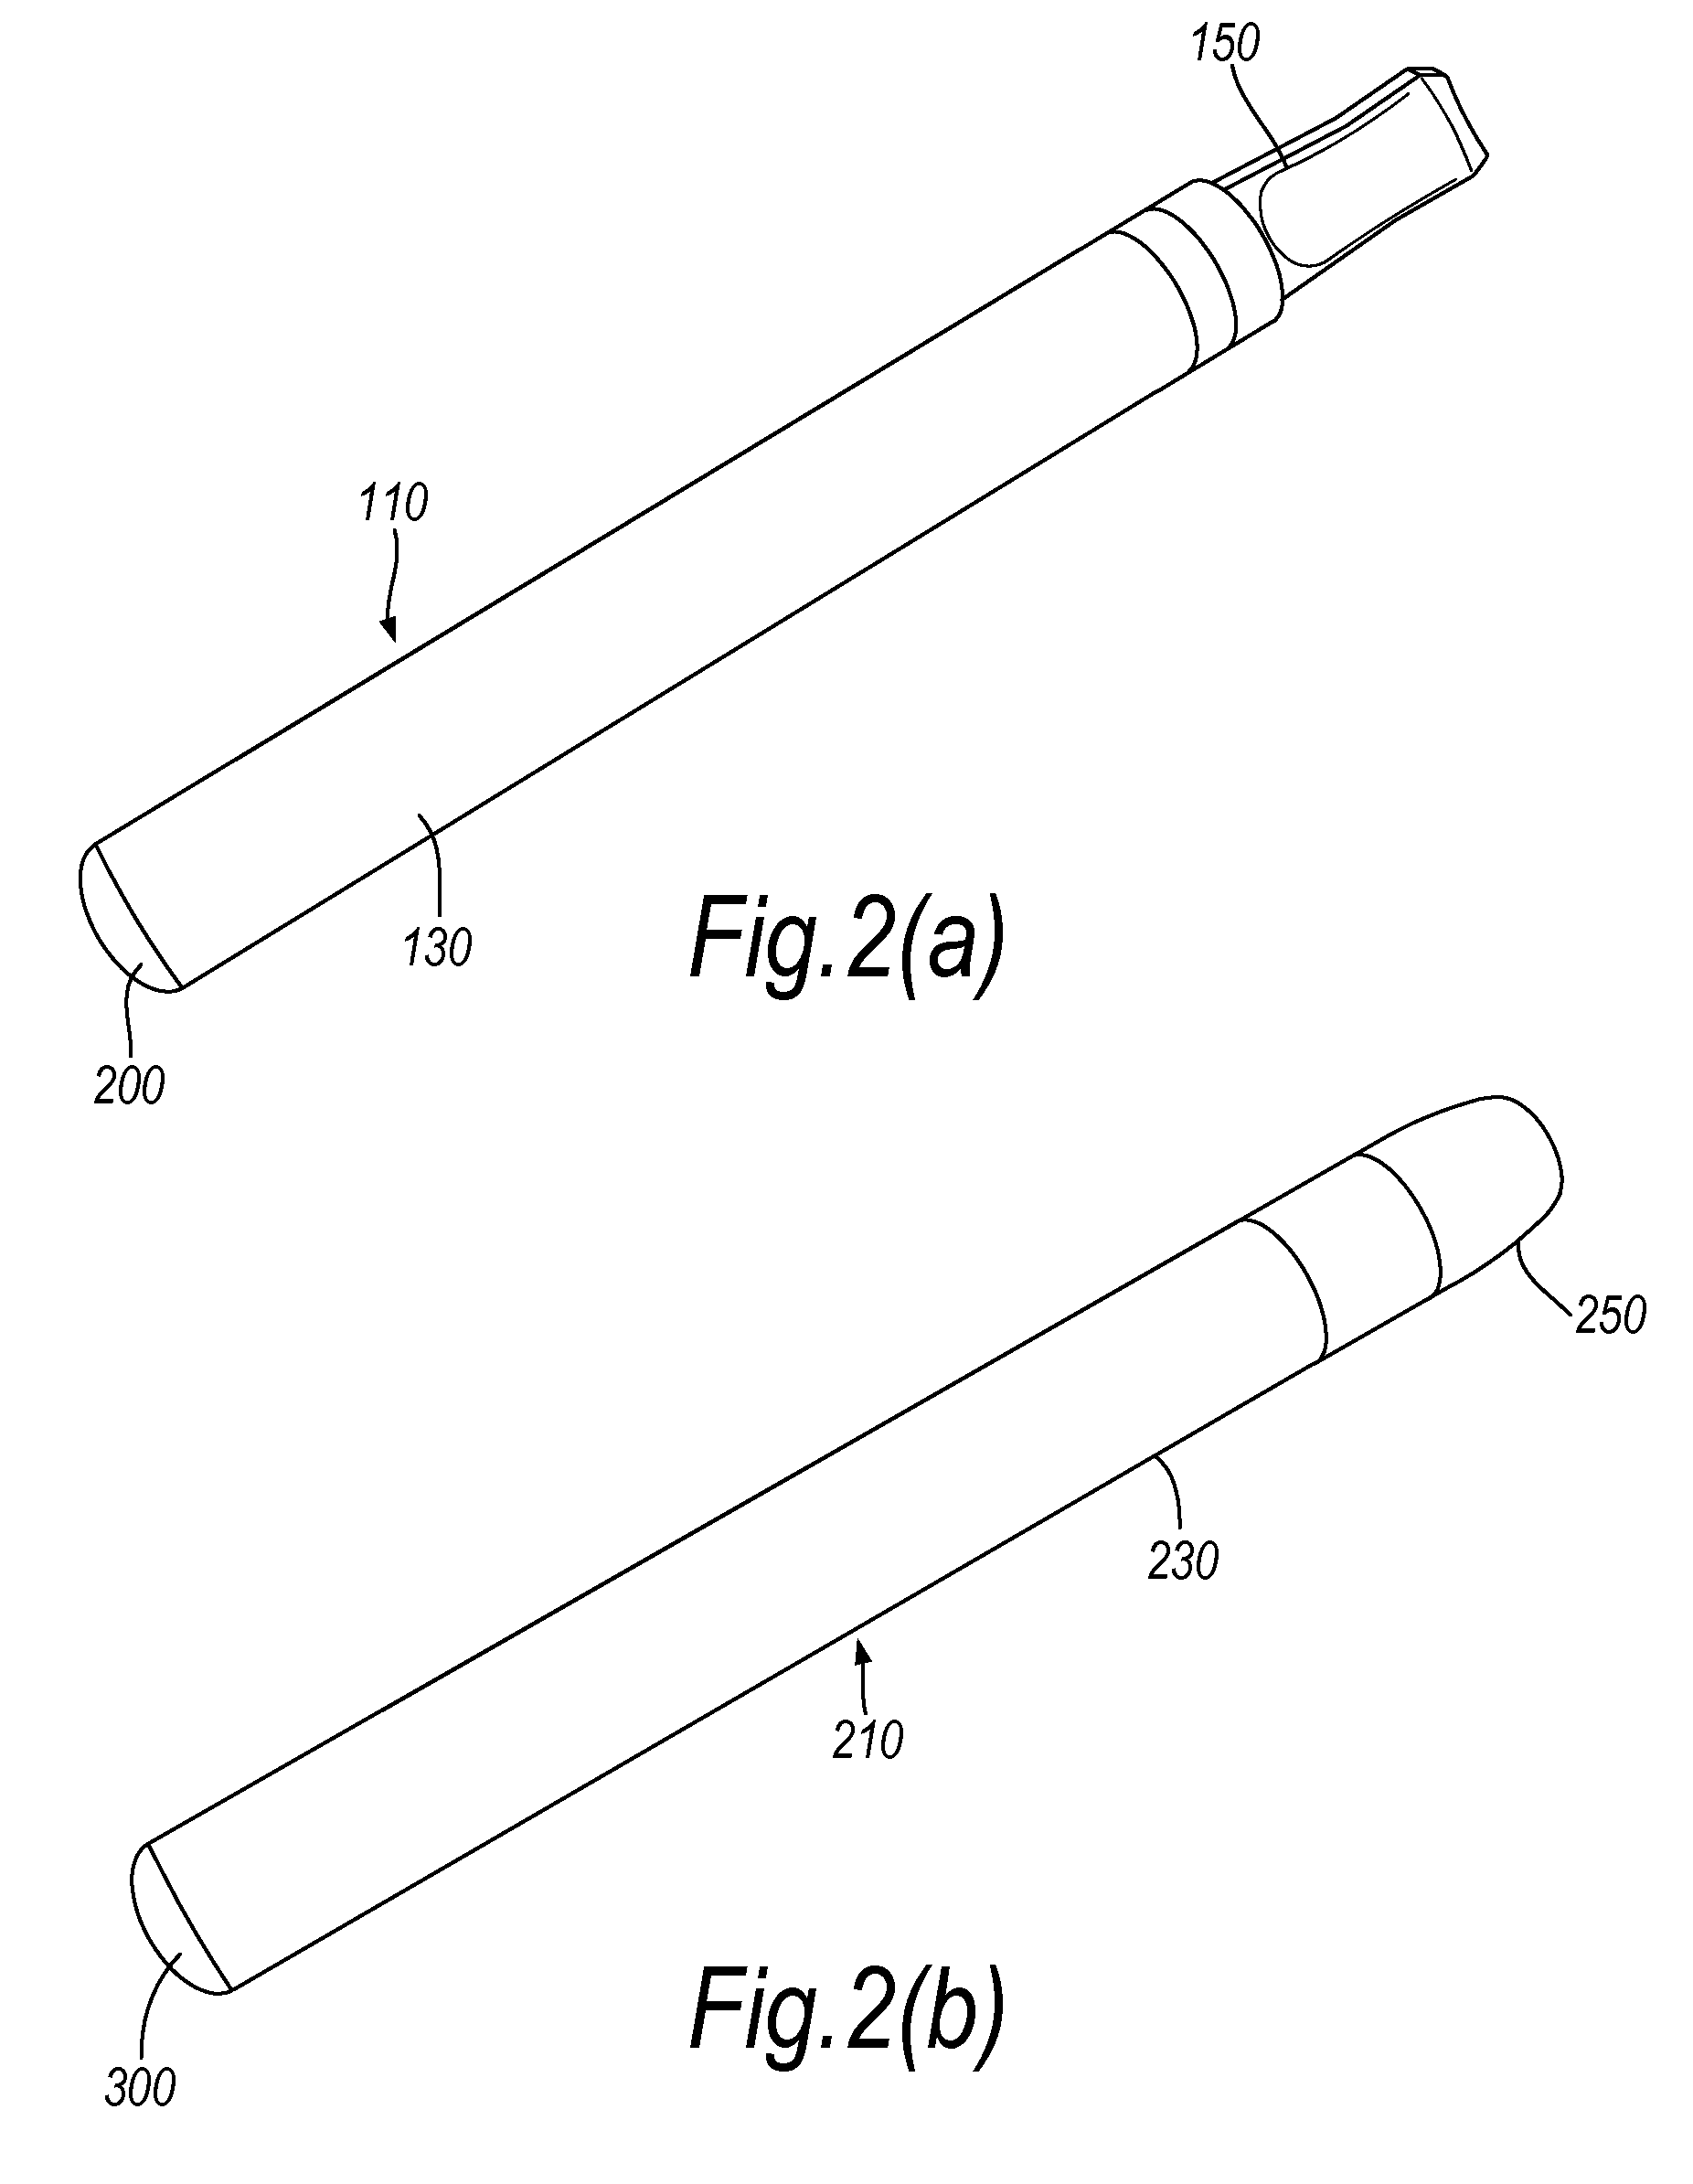 Method and apparatus relating to electronic smoking-substitute devices